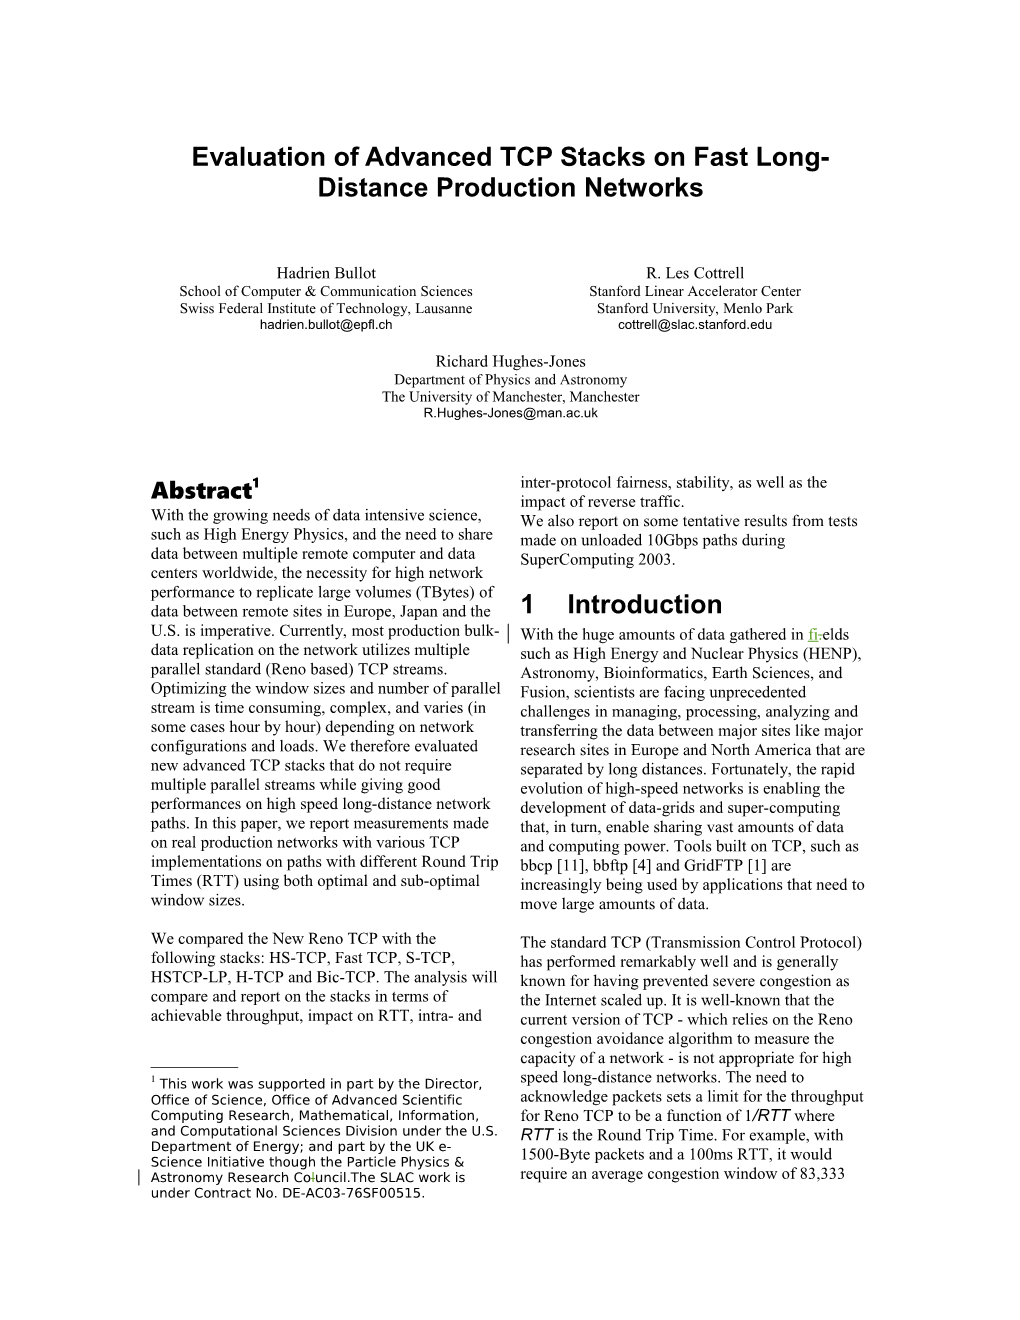 Evaluation of Advanced TCP Stacks on Fast Long-Distance Production Networks